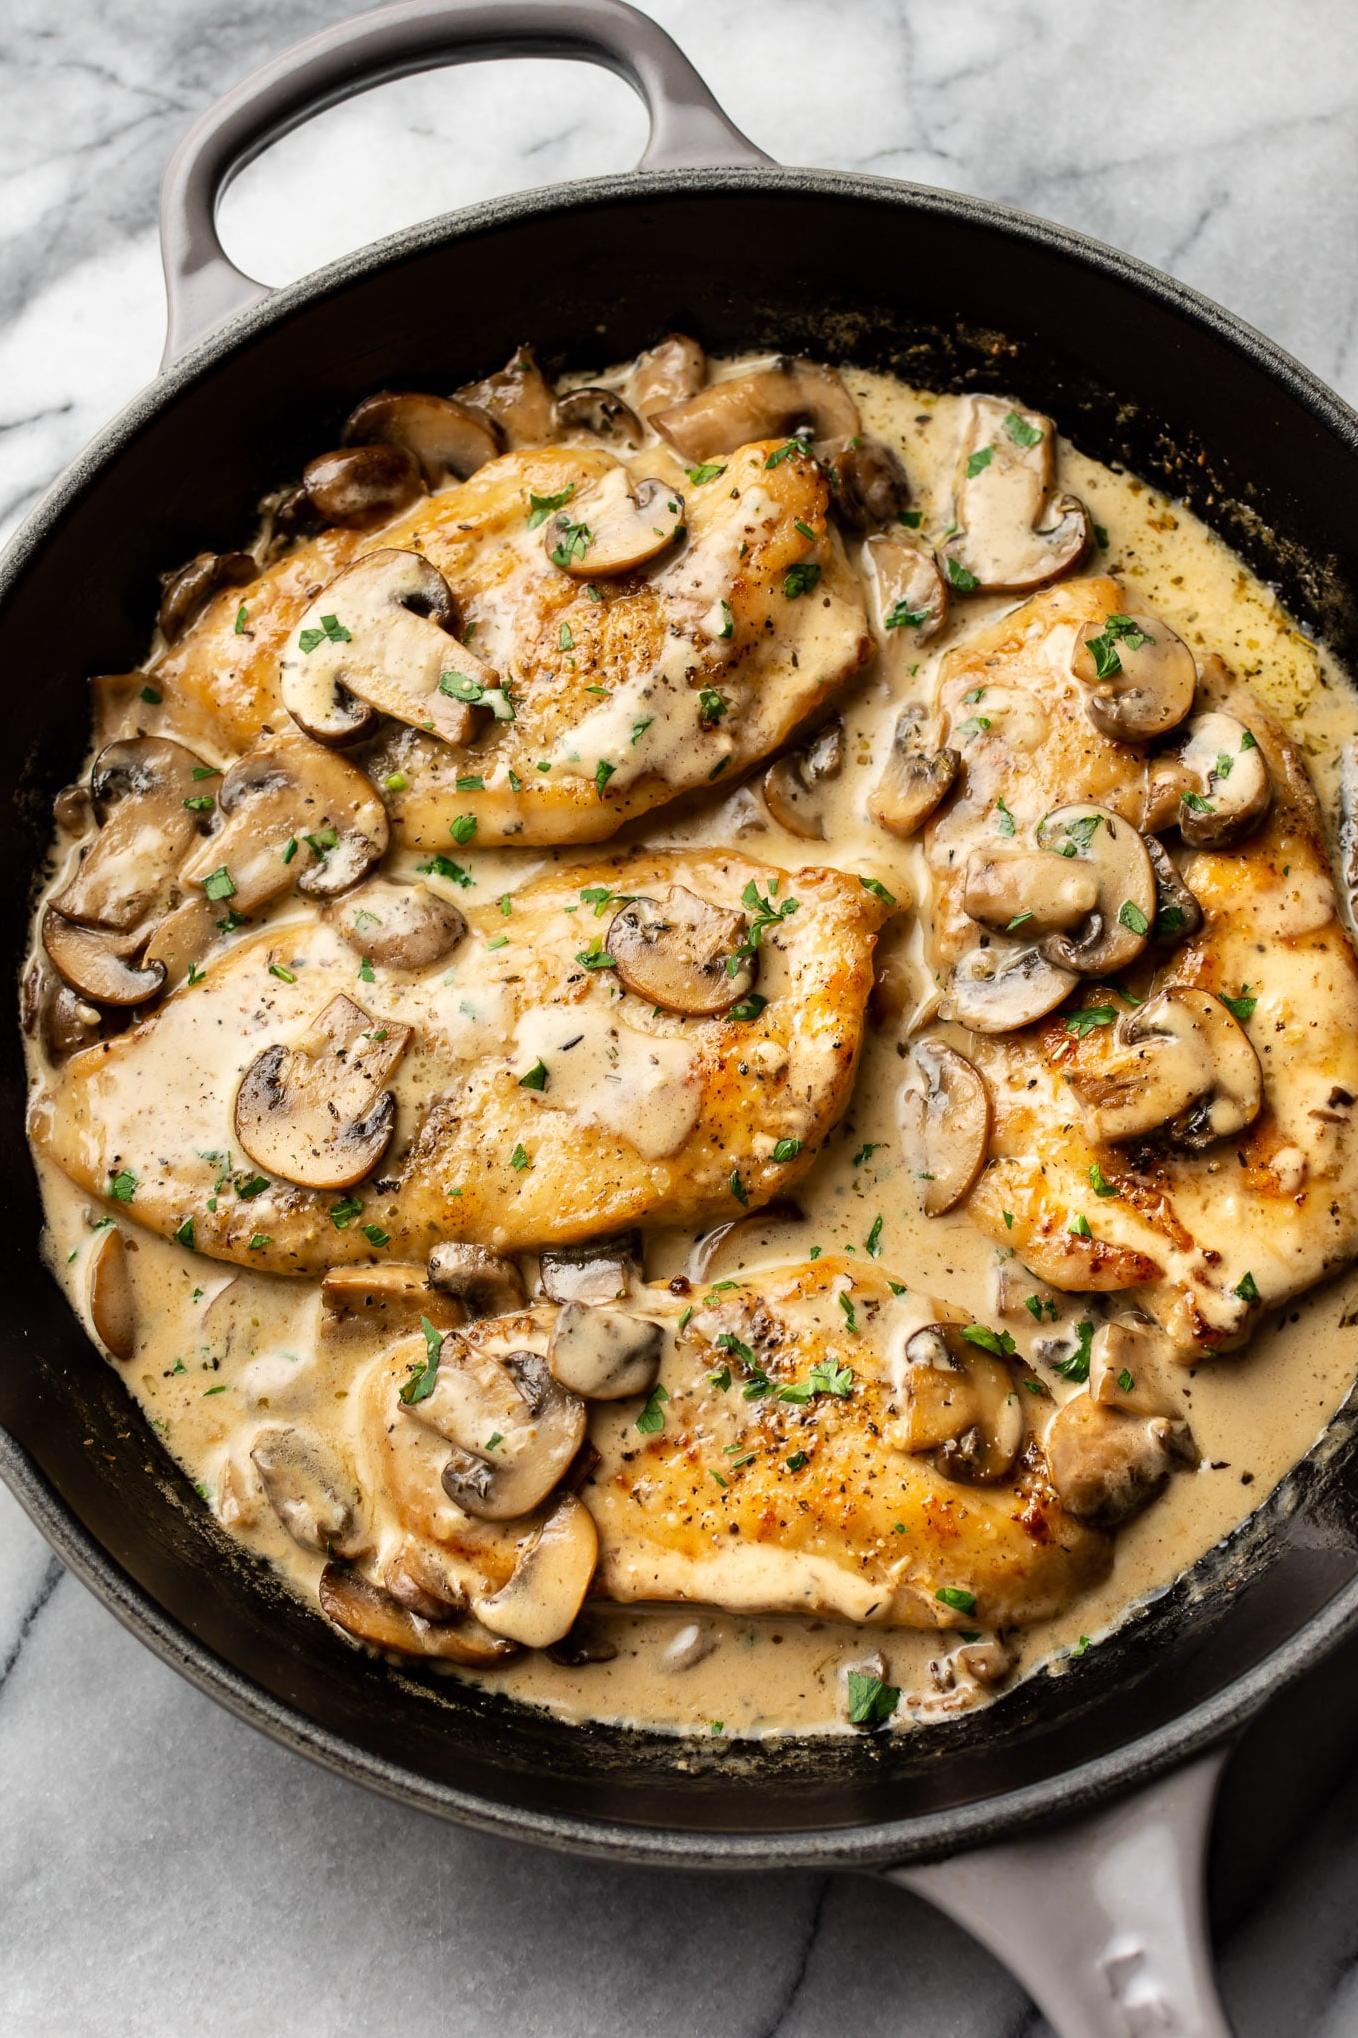 Chicken With White Wine and Mushrooms